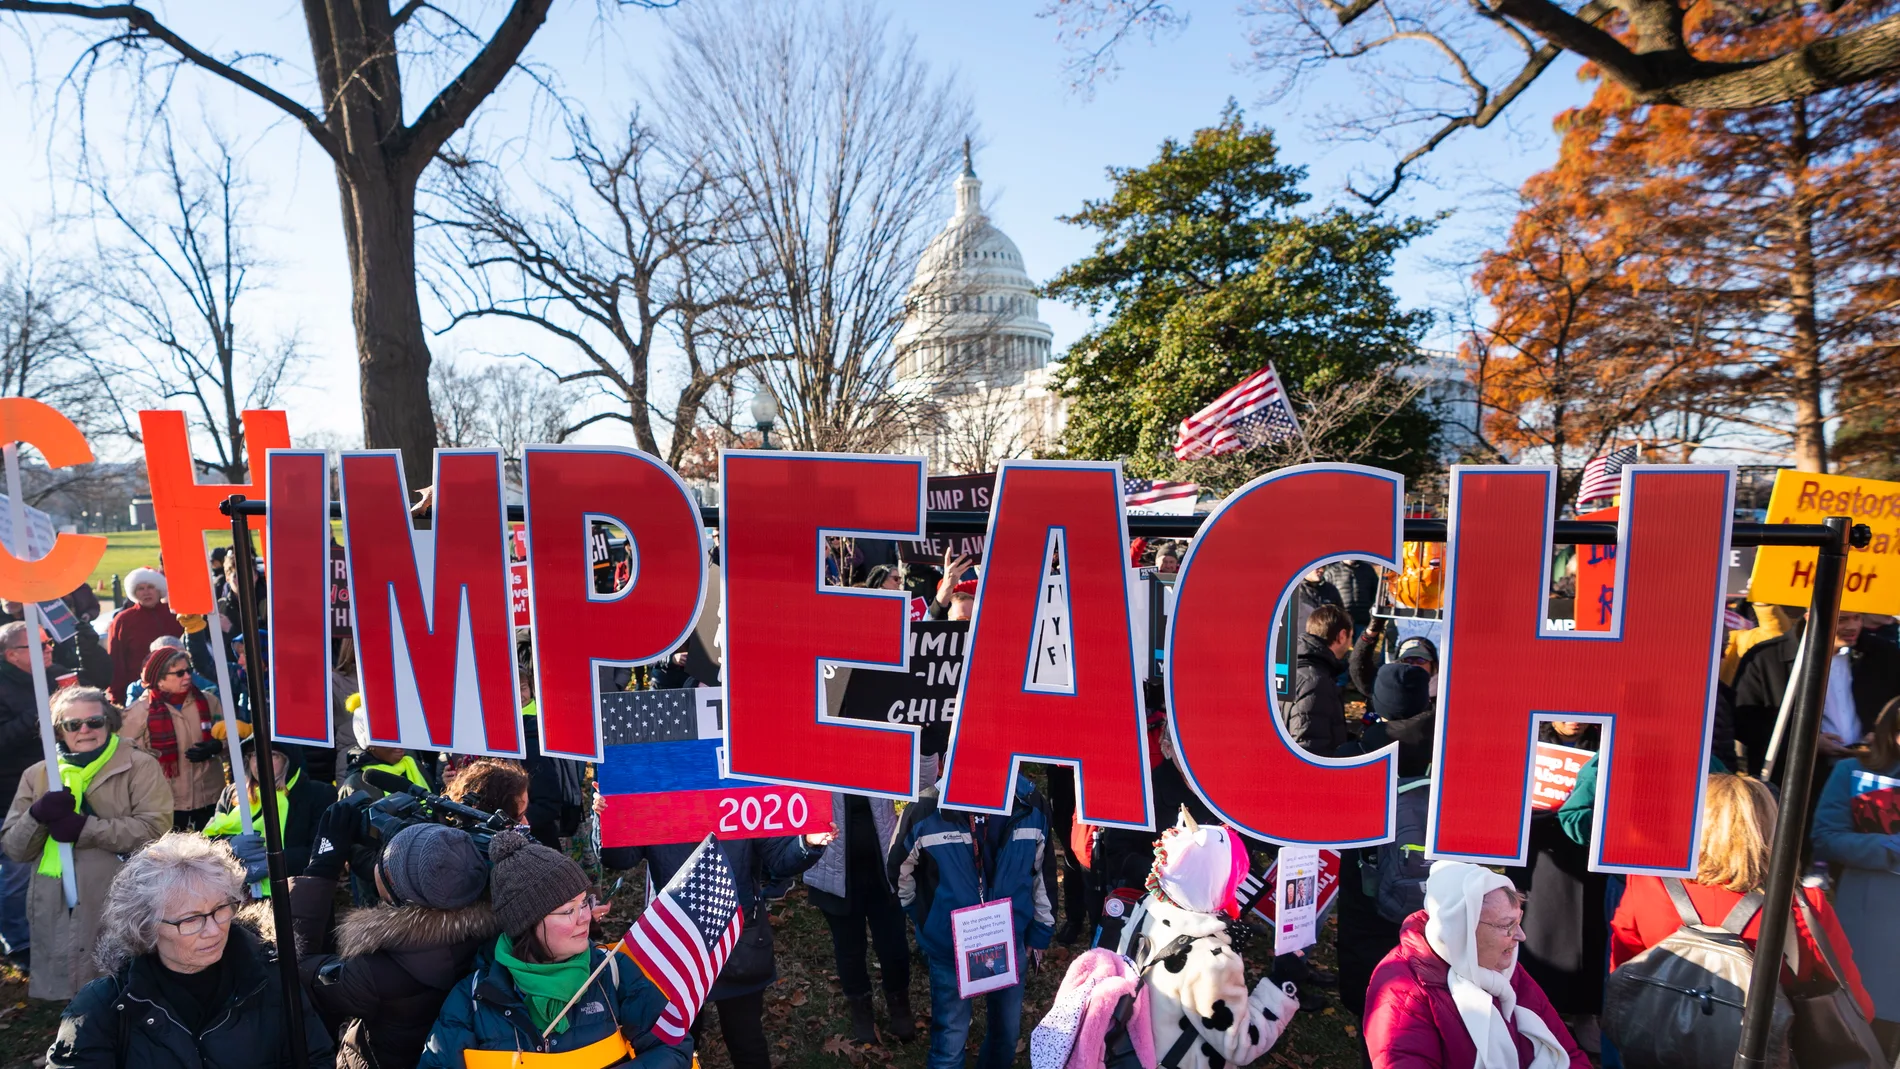 Supporters of impeachment gather outside US Capitol in Washington, DC